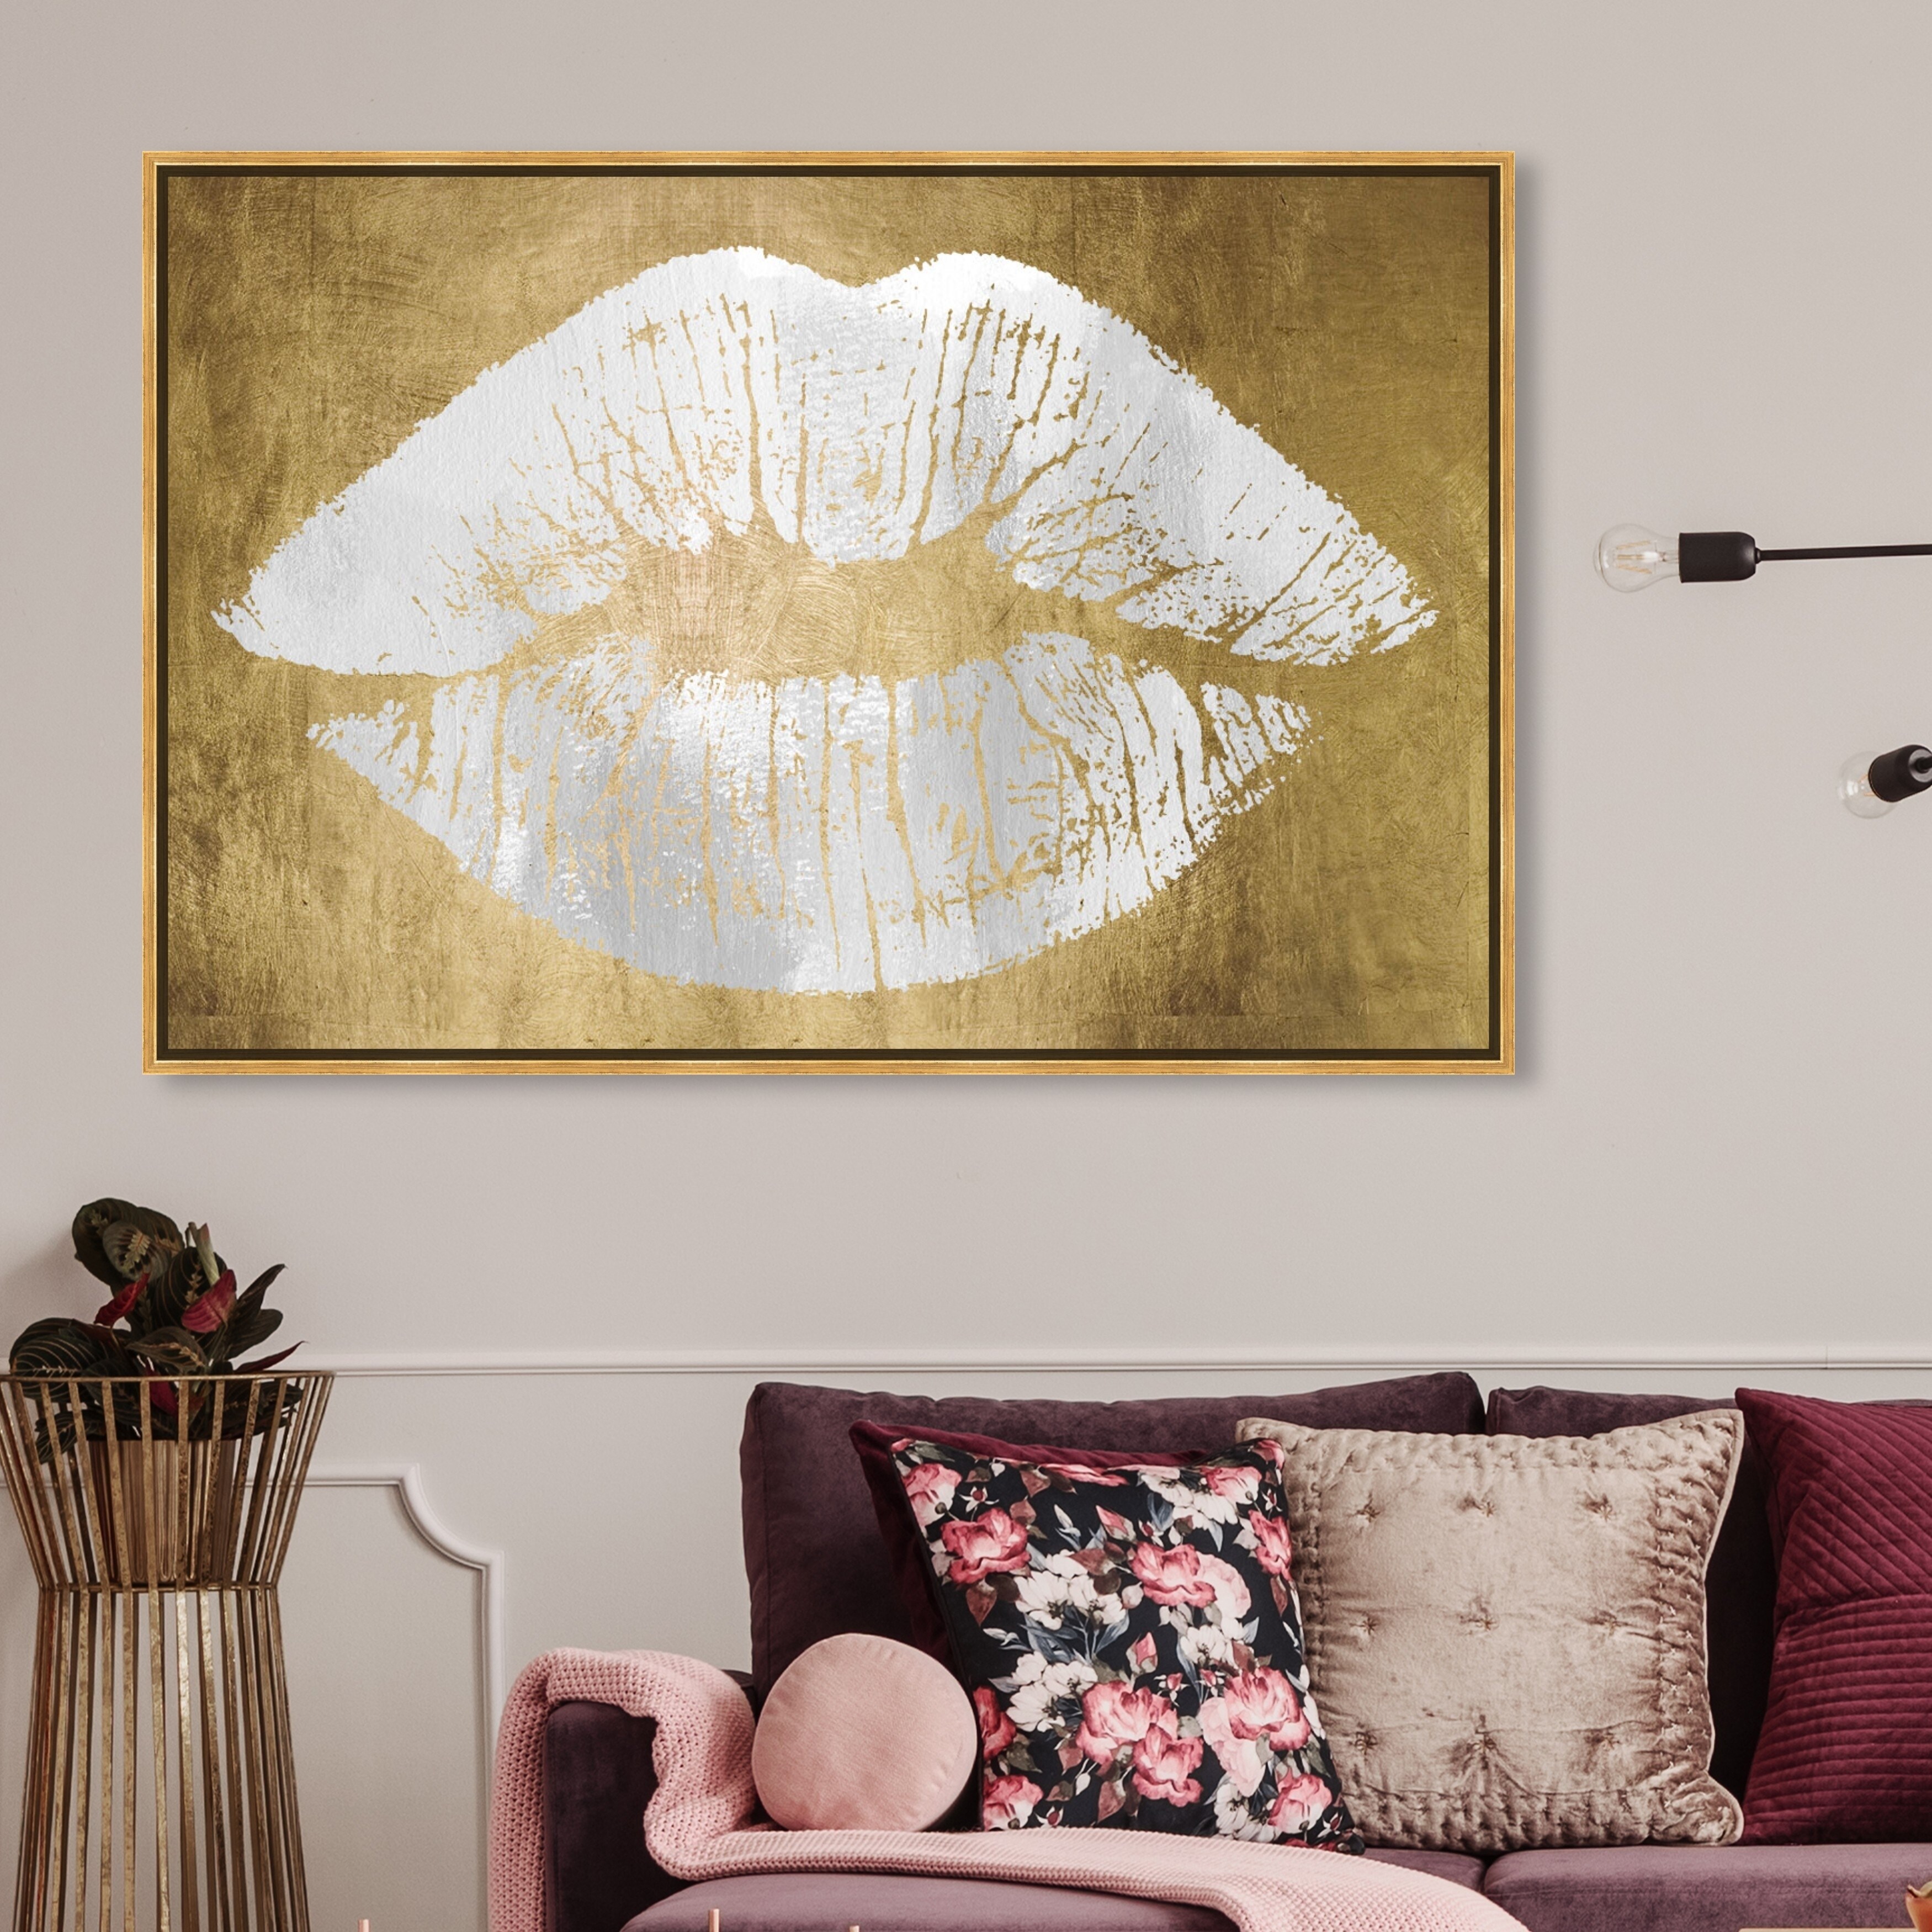  Fashion and Glam Framed Wall Art Canvas Prints 'Solid